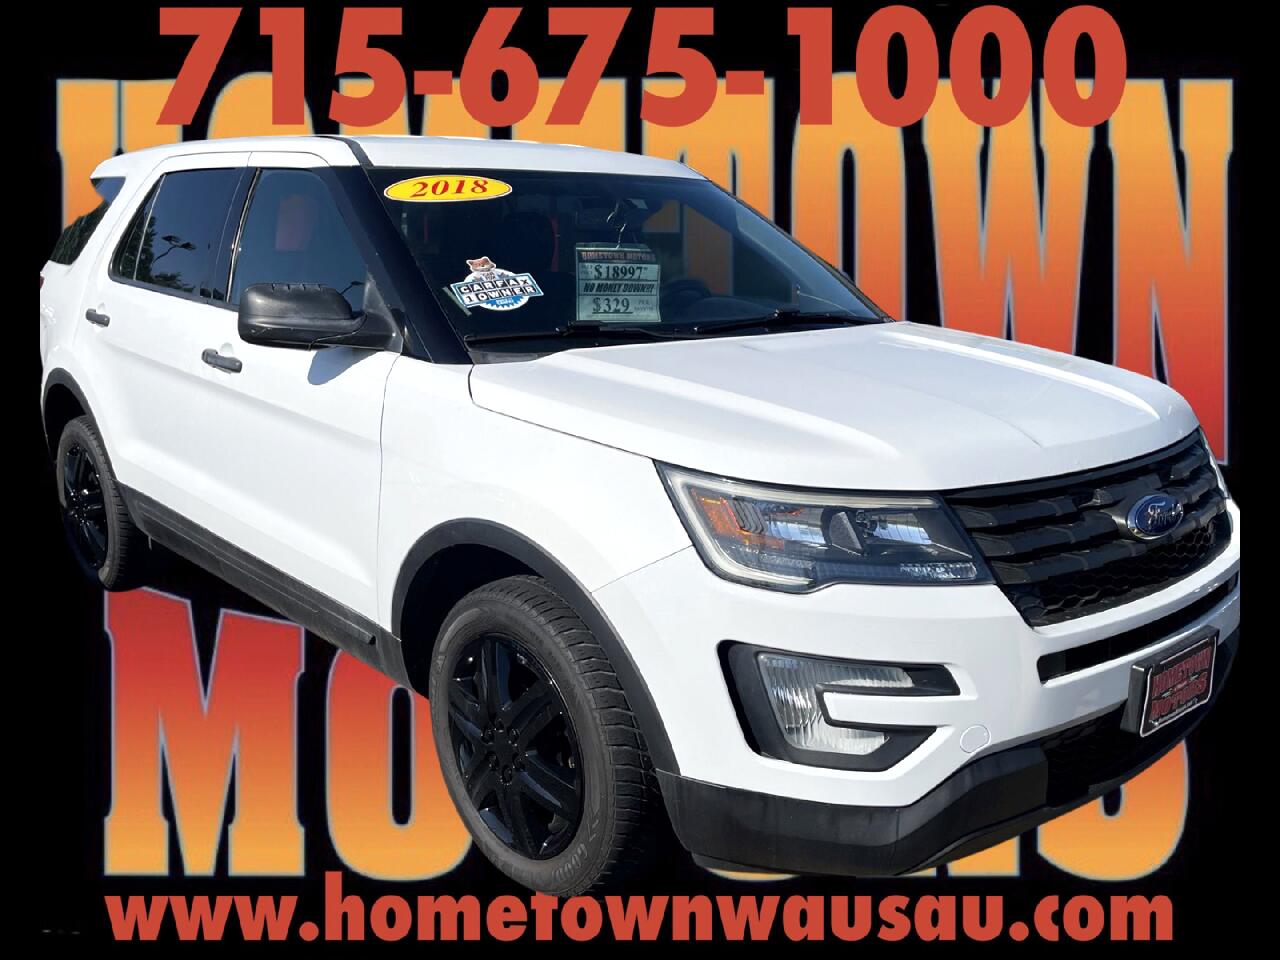 Ford Explorer Police 4WD 2018